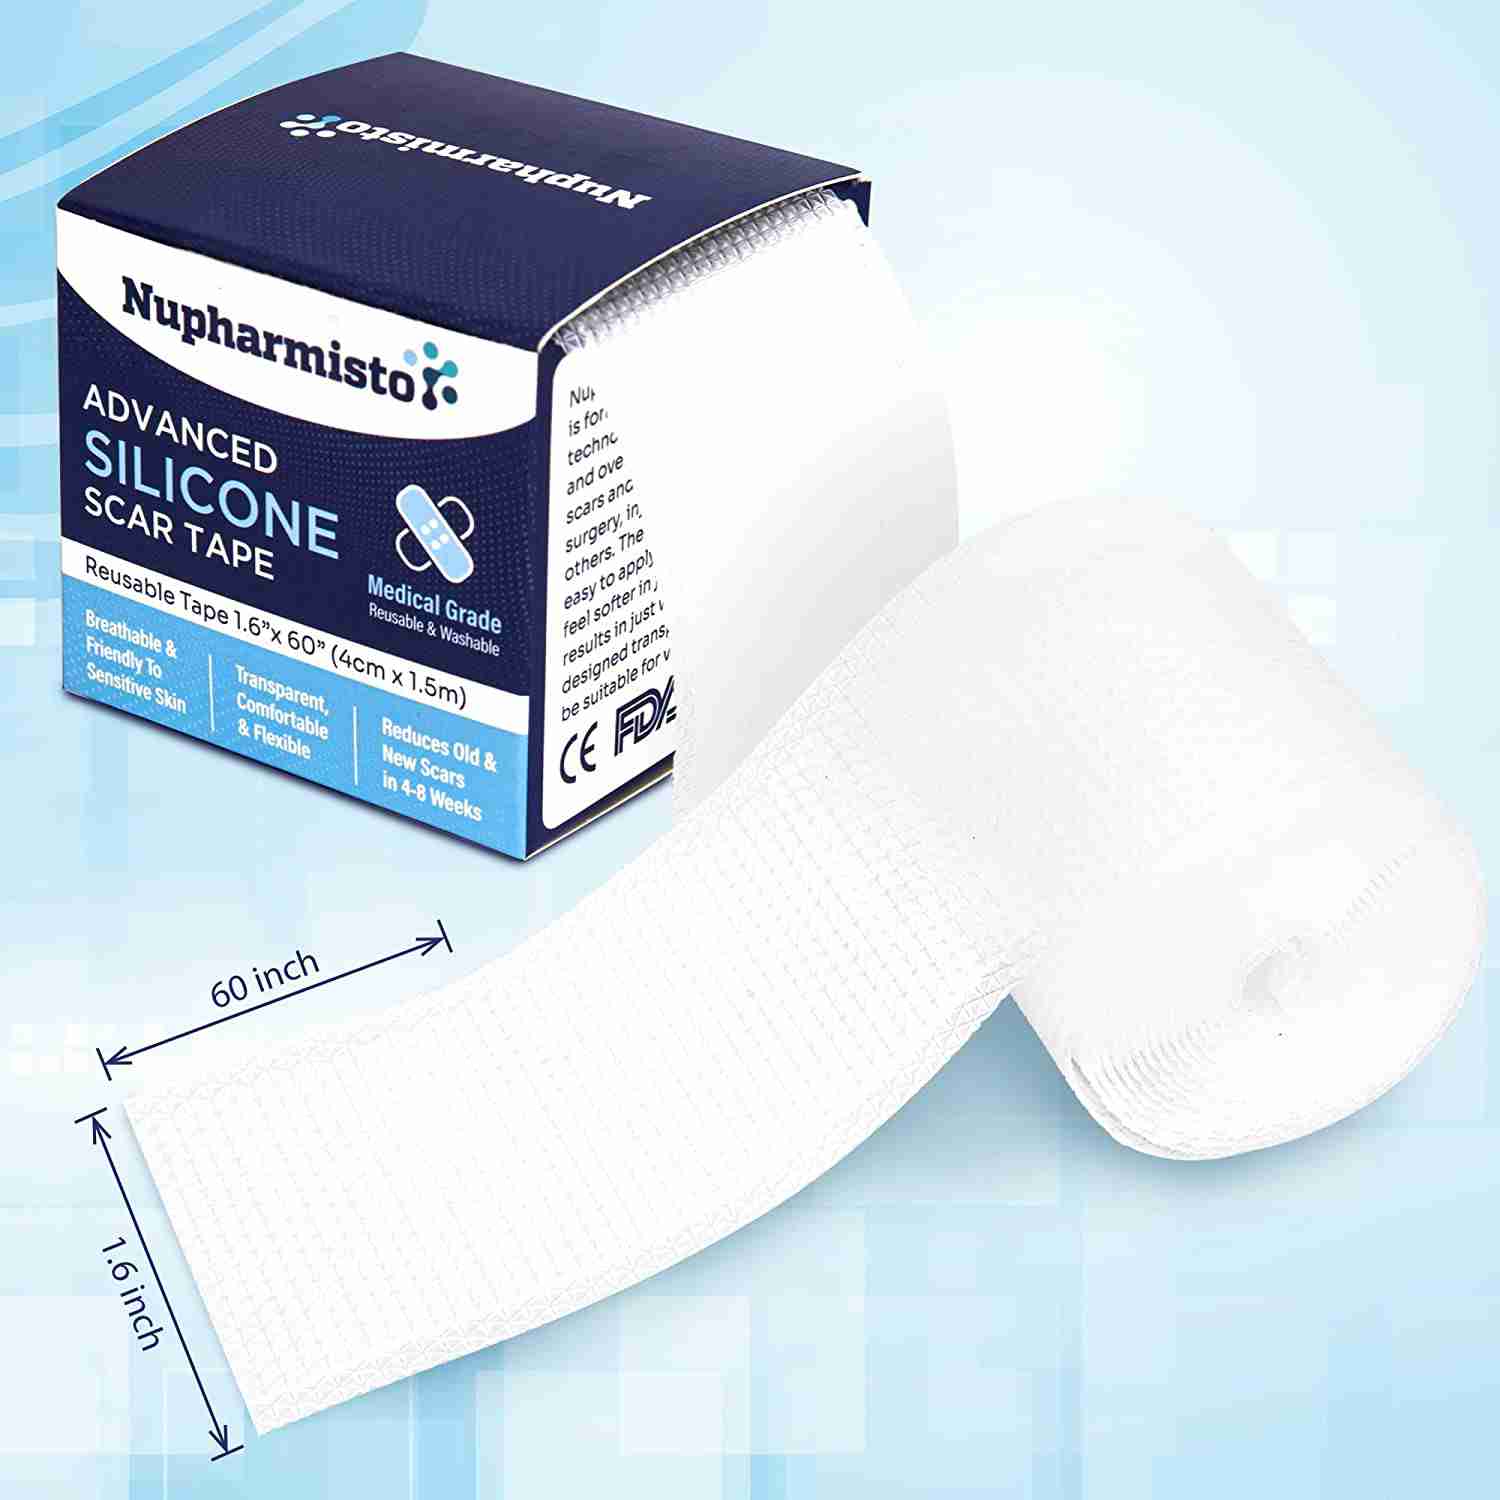 silicone-scar-strips-nupharmisto with discount code